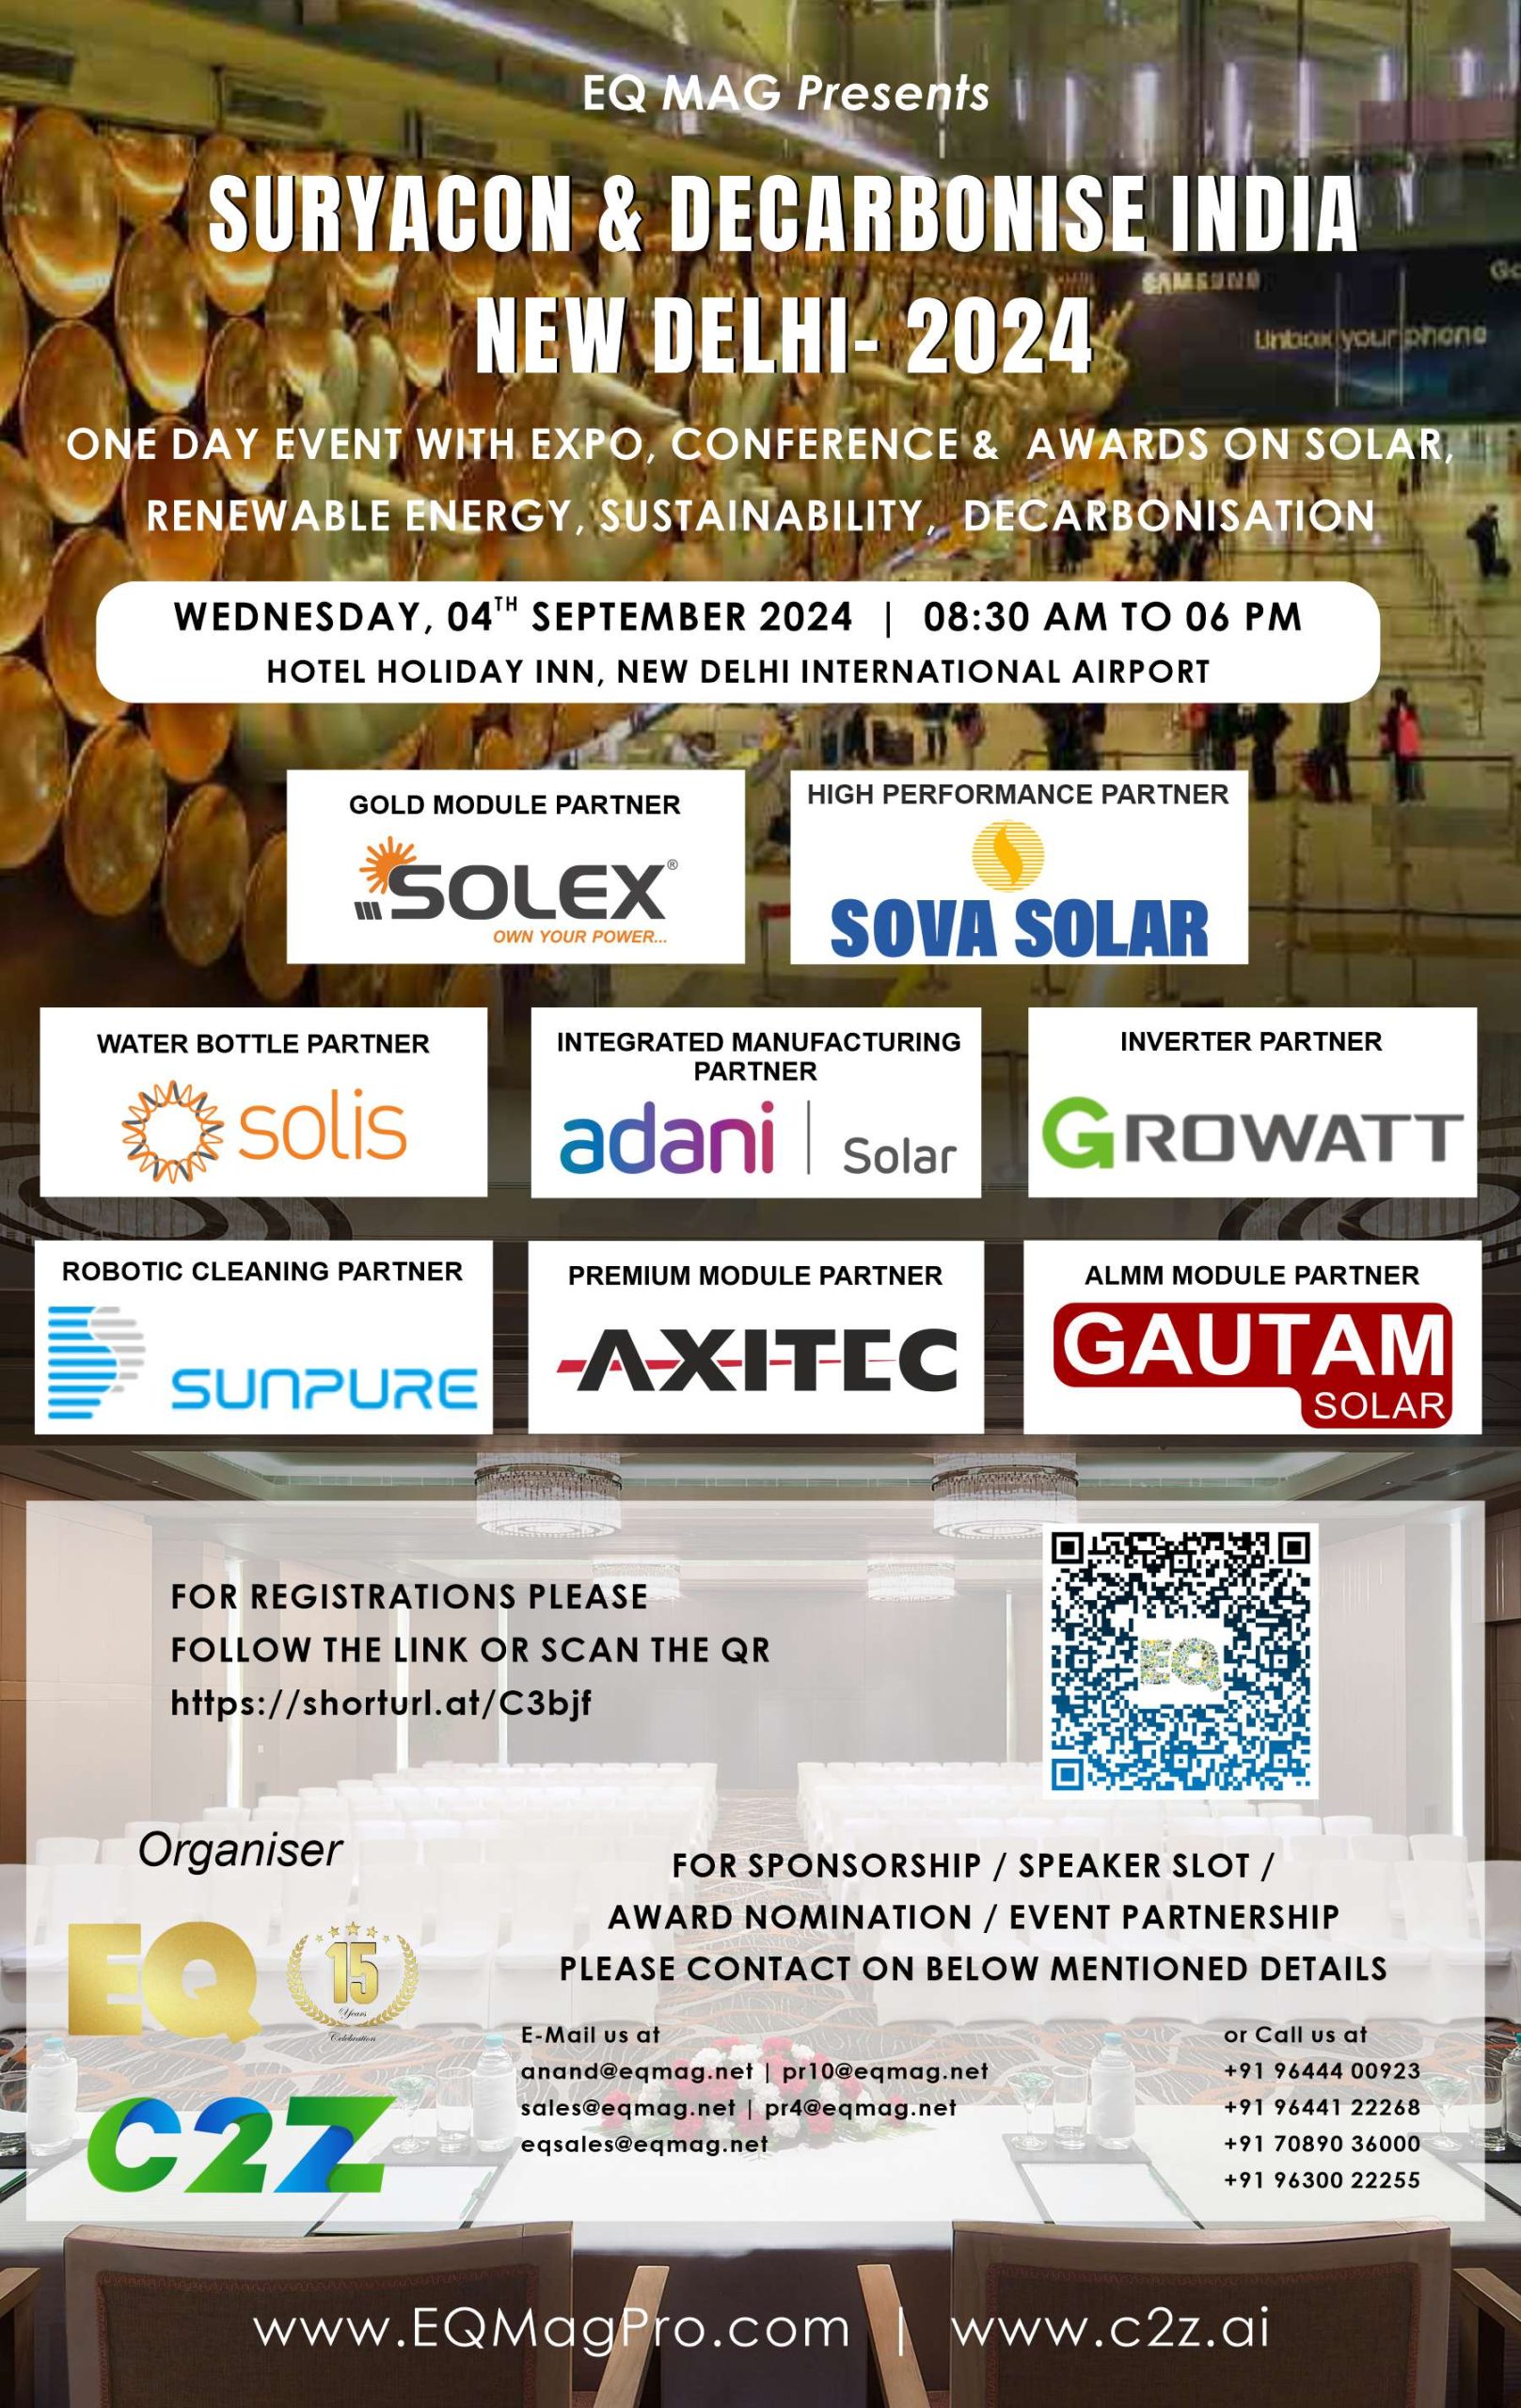 SuryaCon & DeCarbonise India – New Delhi – One Day Event with Expo, Conference & Awards on Solar, Renewable Energy, Sustainability, DeCarbonisation, Carbon Neutrality, Net Zero